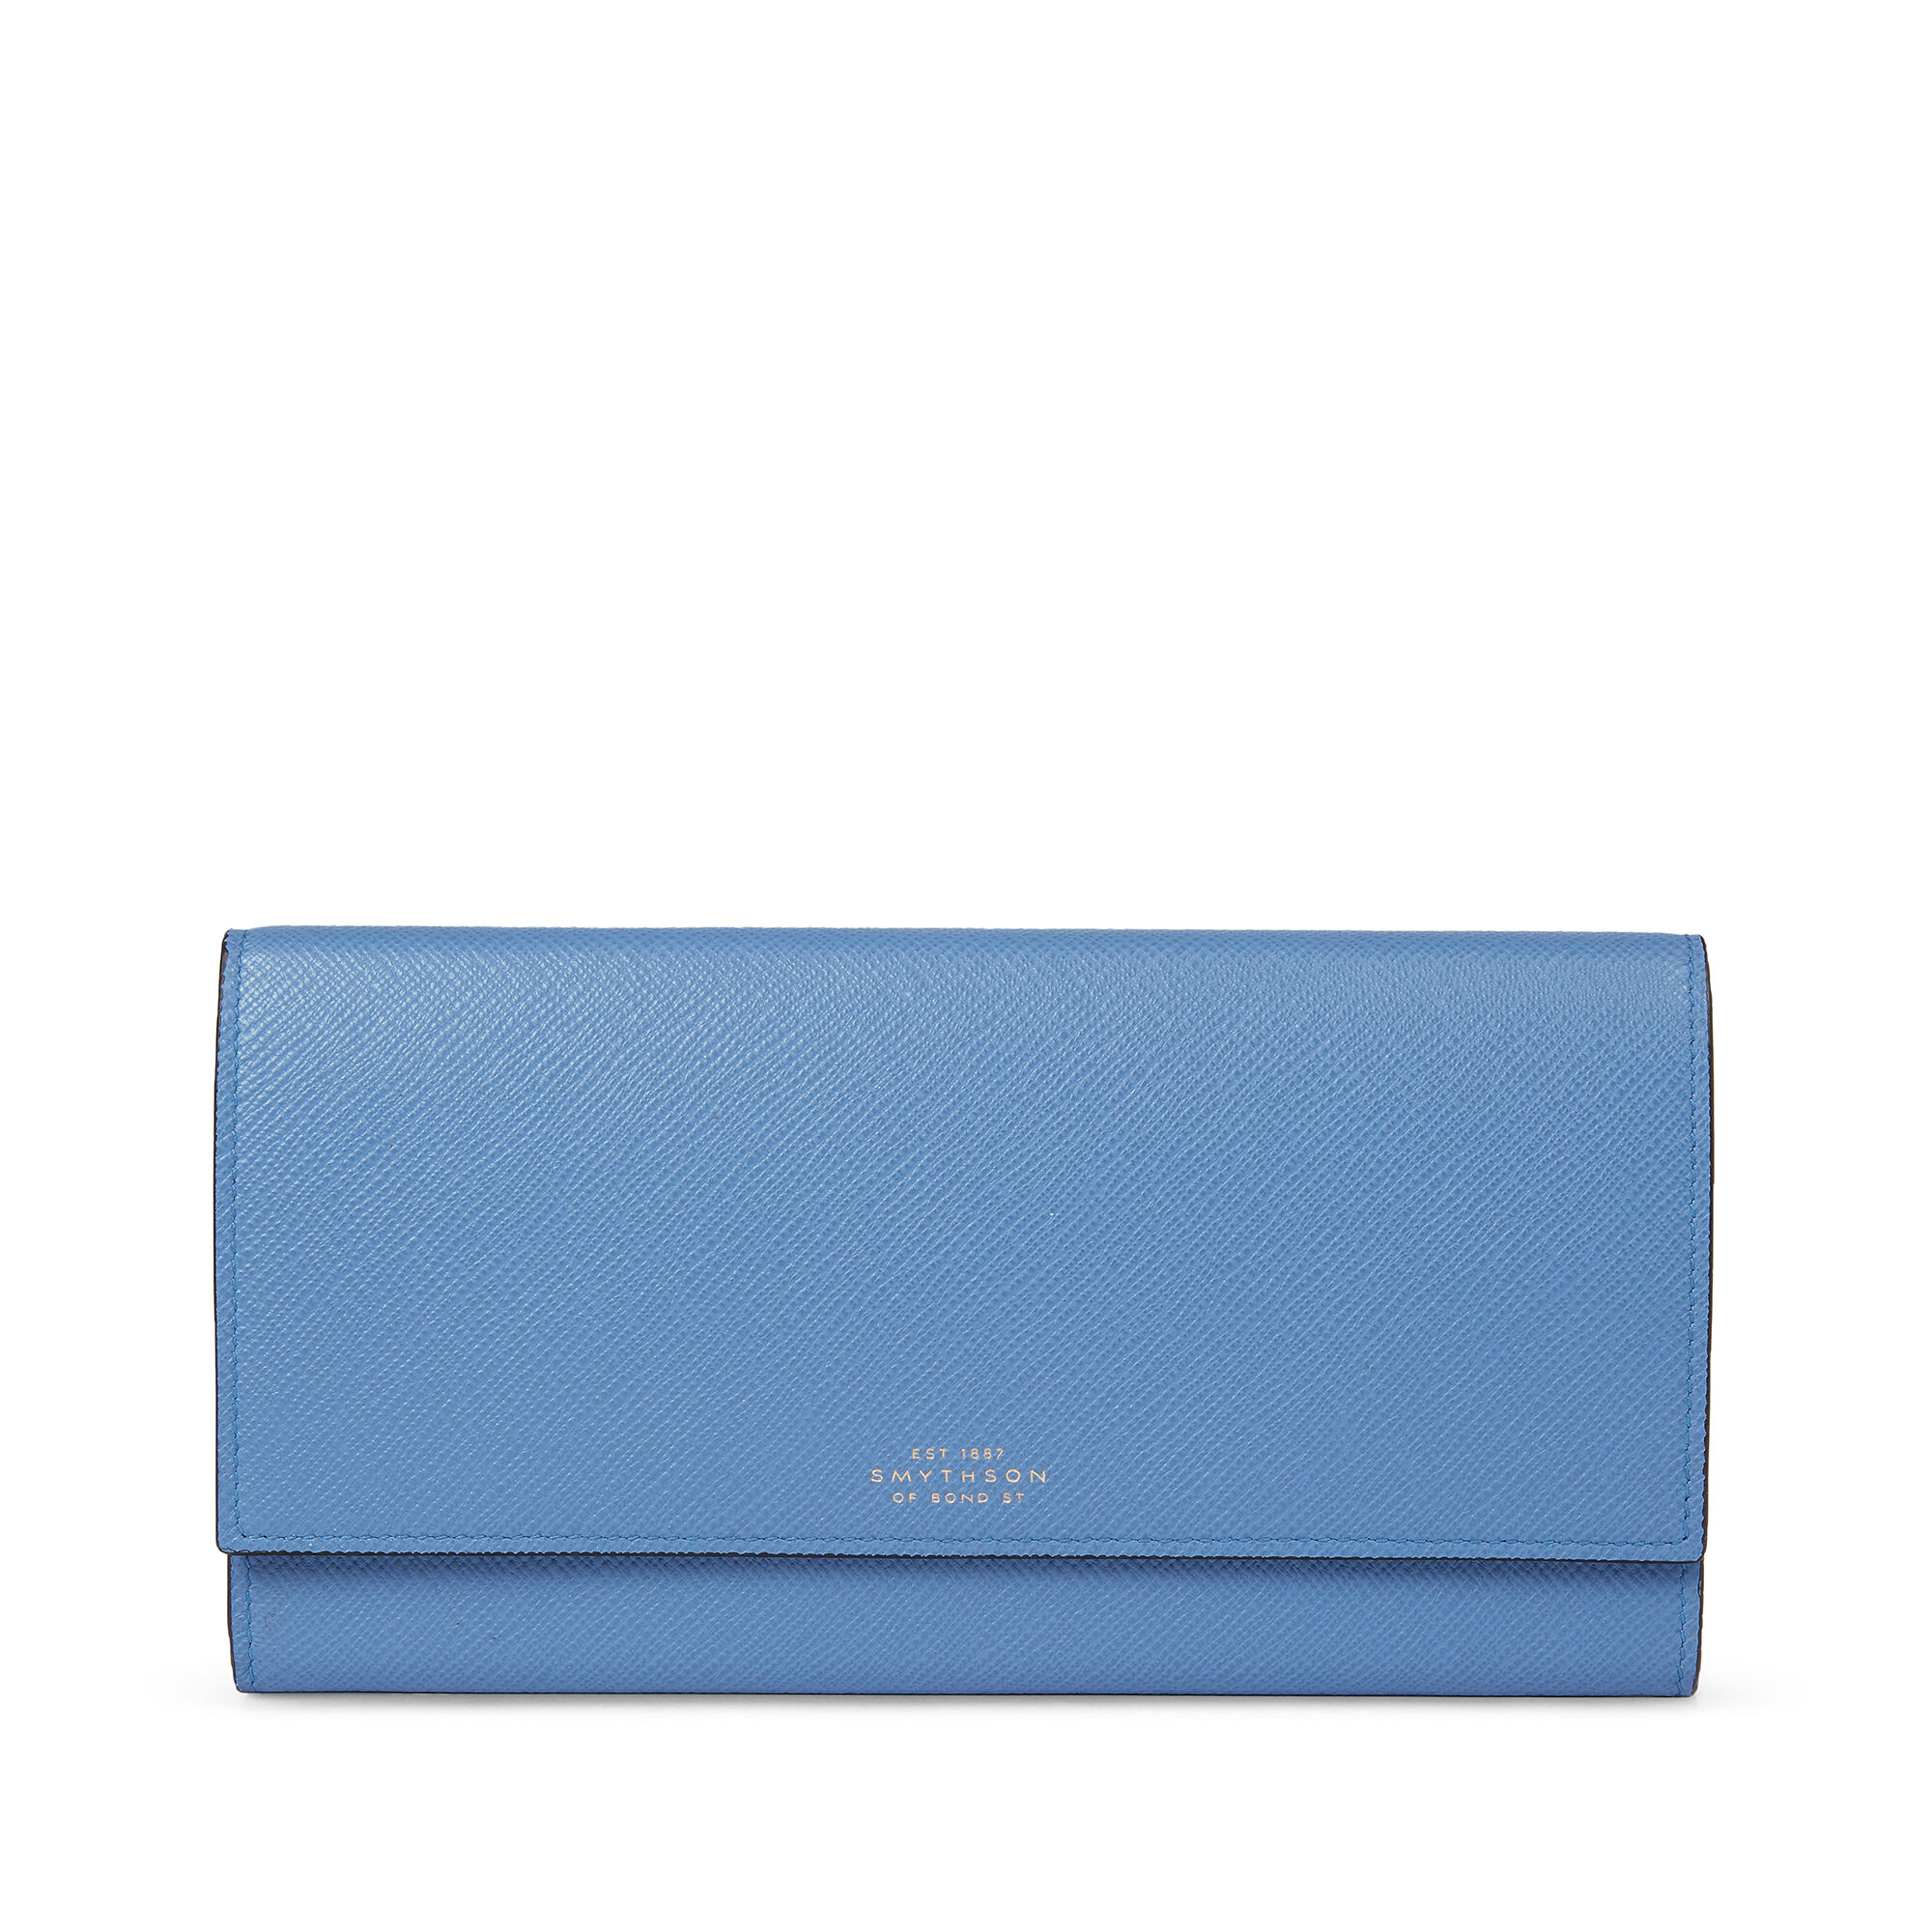 Smythson Leather Card Holder Womens Accessories Wallets and cardholders 